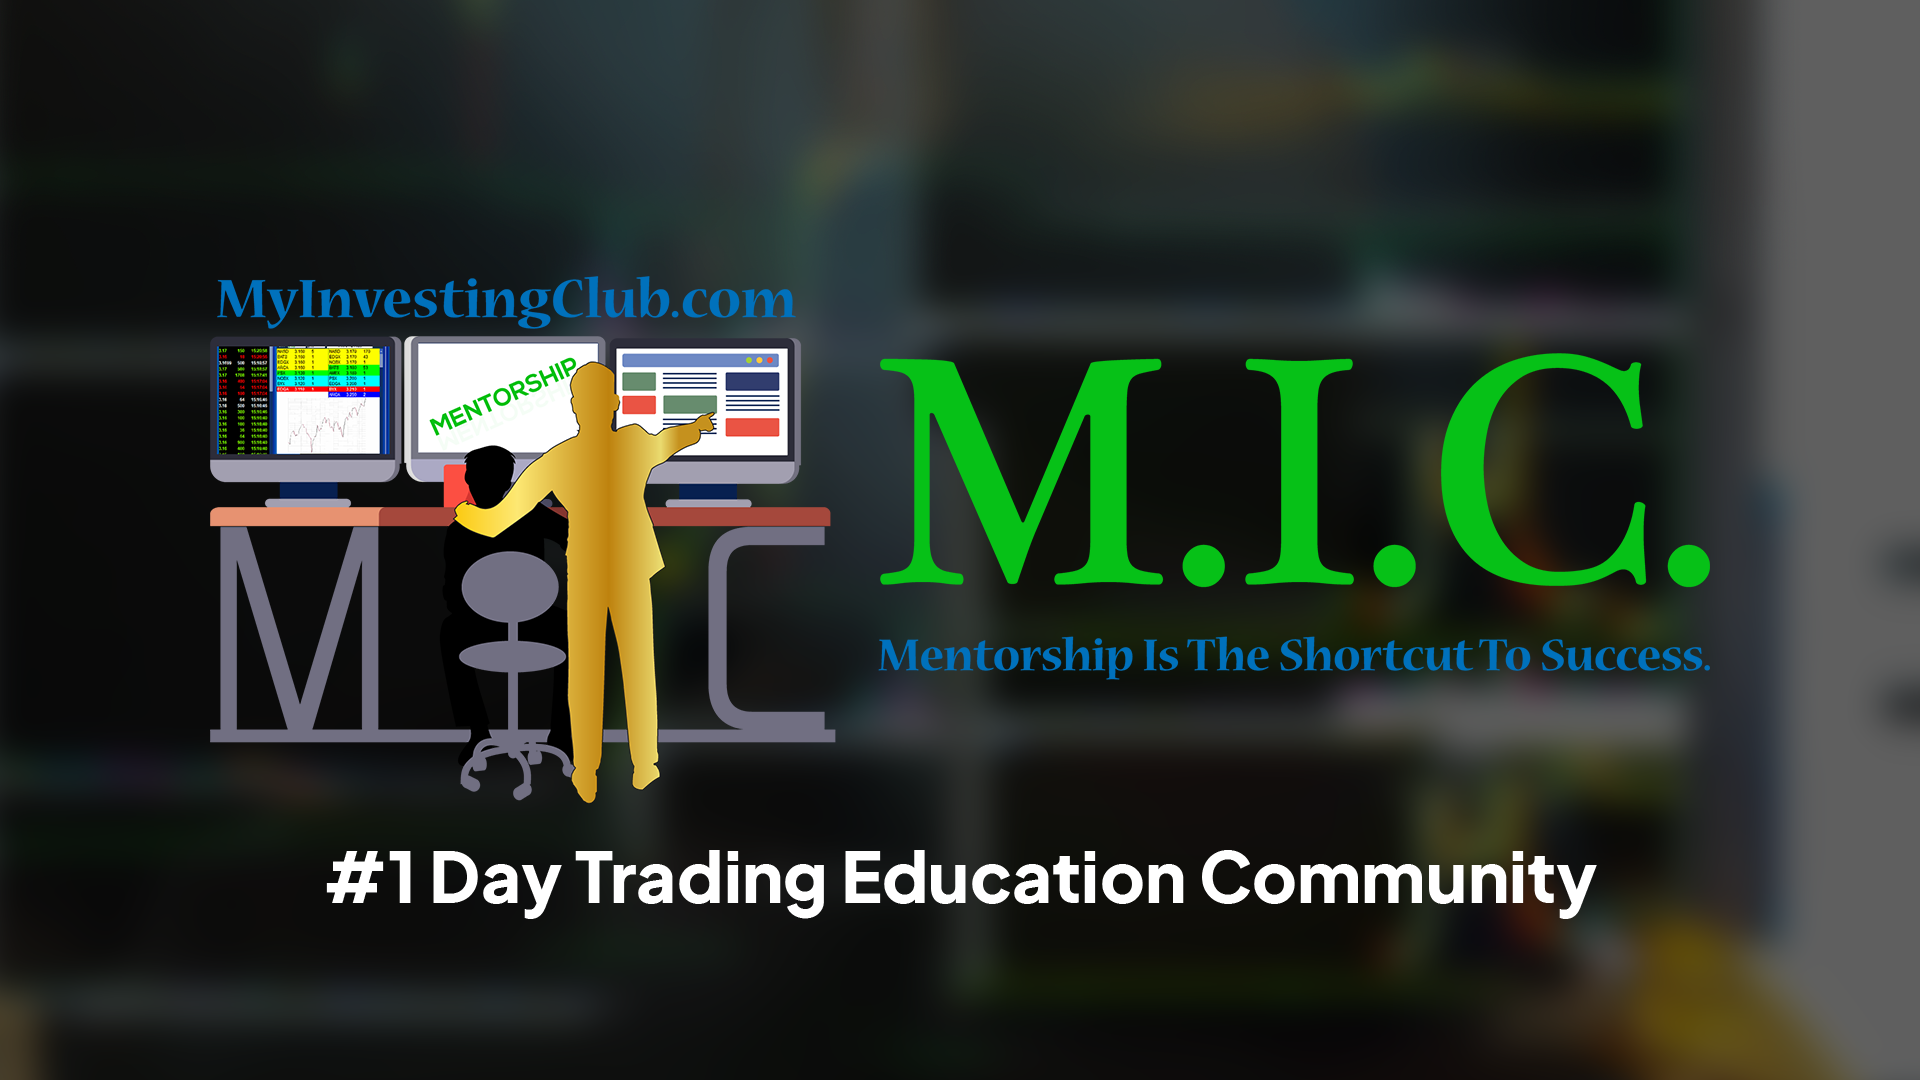 Get The Best Stock Screening Training For Beginner Day Traders In This Chatroom